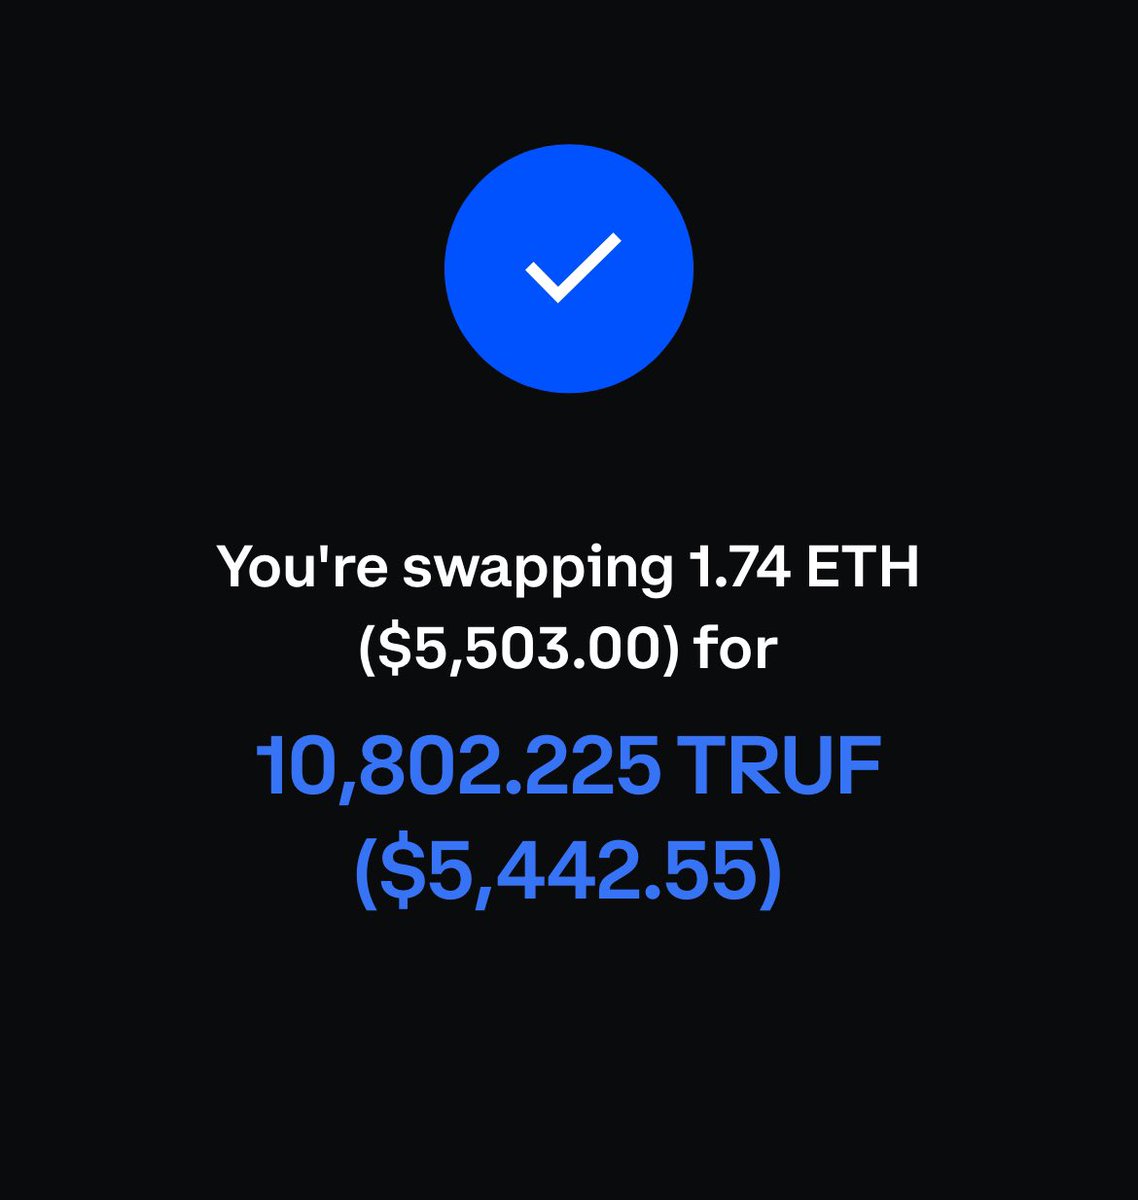 @chainlink x @coinbase backed token @truflation will be in the Top 100 this year and that’s the $TRUF.  Buying these dips is a no brainer . #crypto #bitcoin #chainlink #build